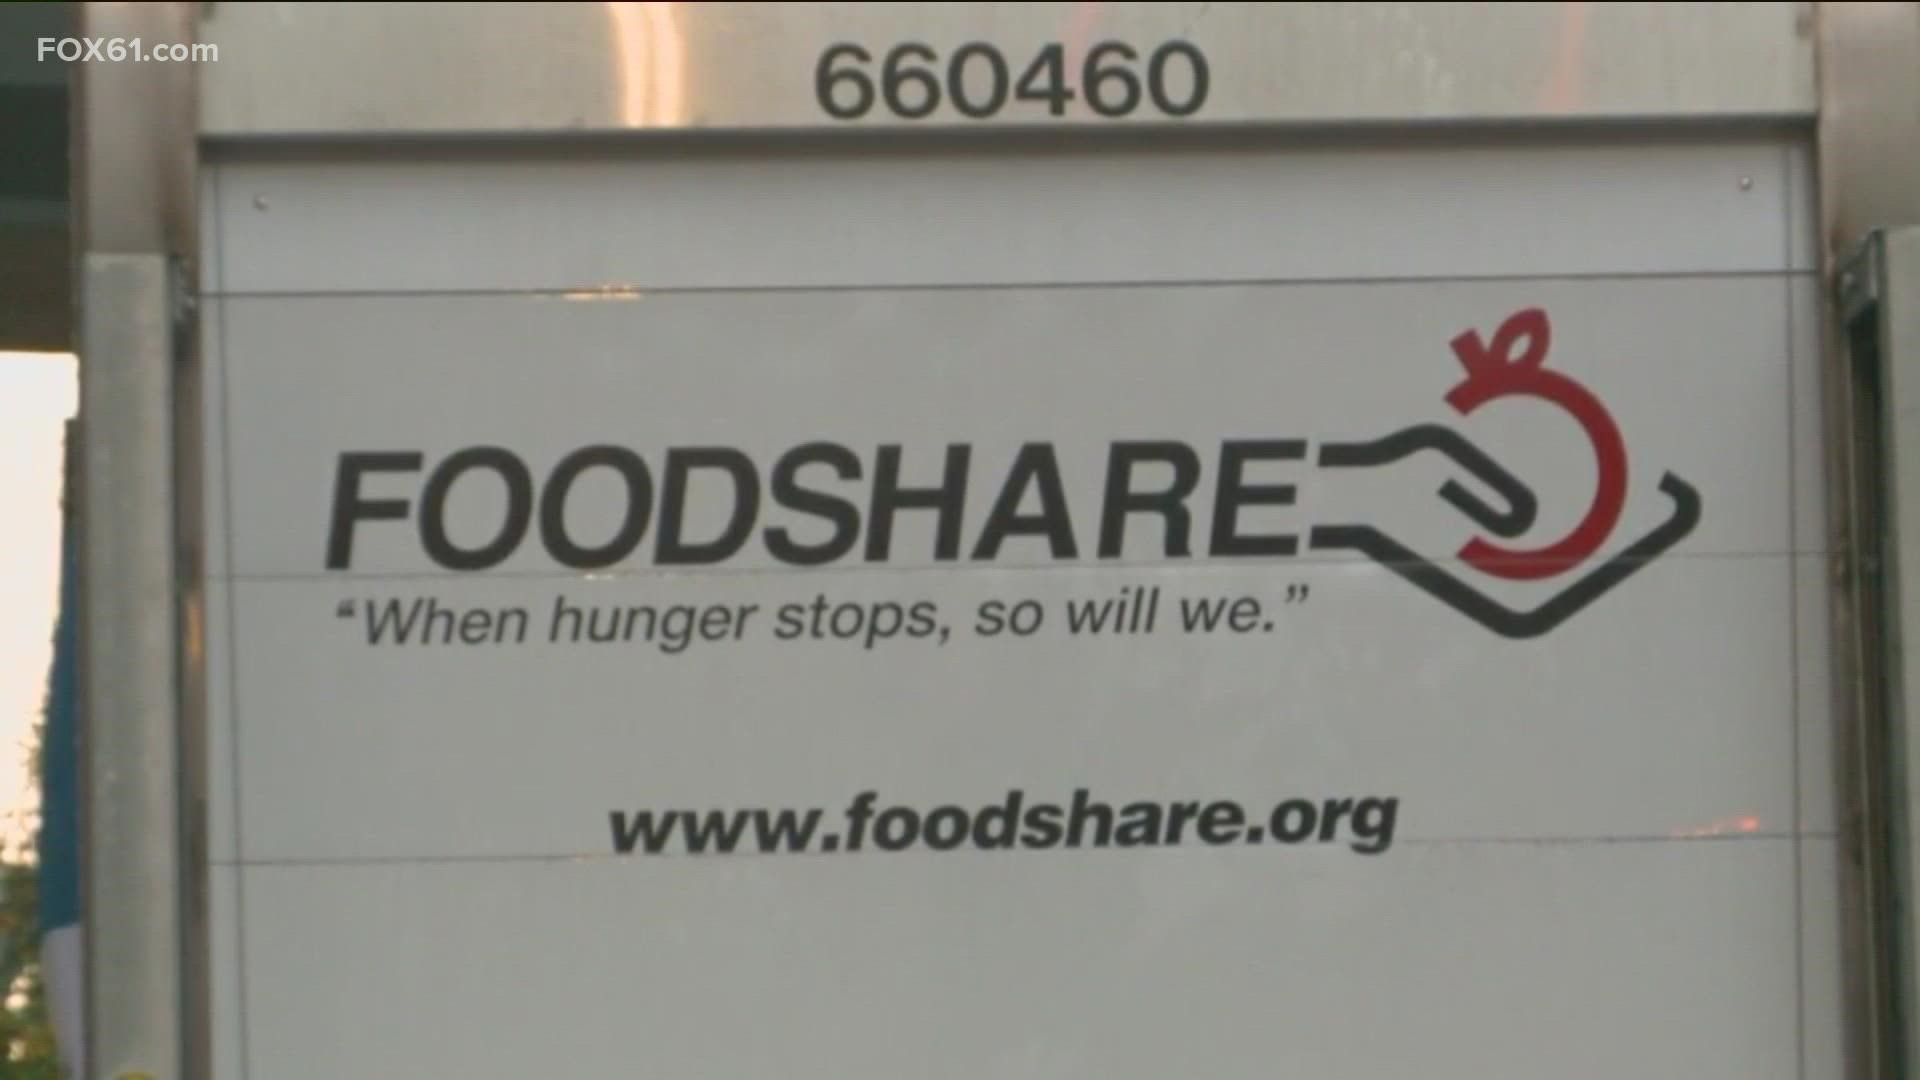 Between COVID-19 and issues in the supply chain, Foodshare's president and CEO said the challenge is daunting but doable.